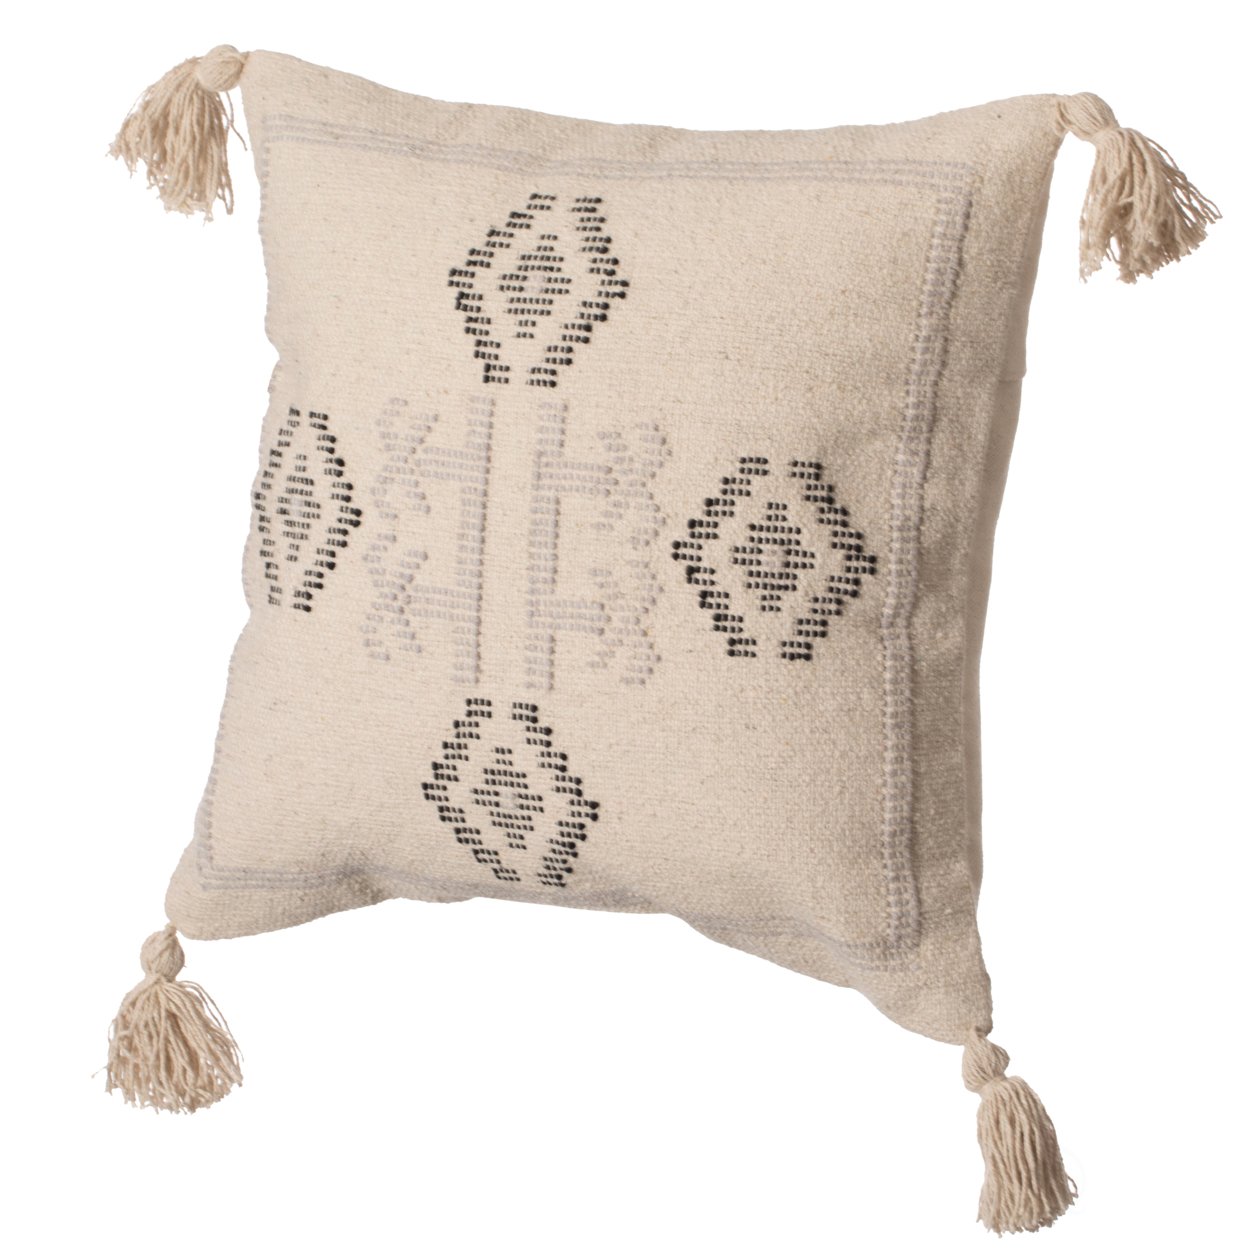 16 Handwoven Cotton Throw Pillow Cover With Tribal Aztec Design And Tassel Corners - Brown With Cushion